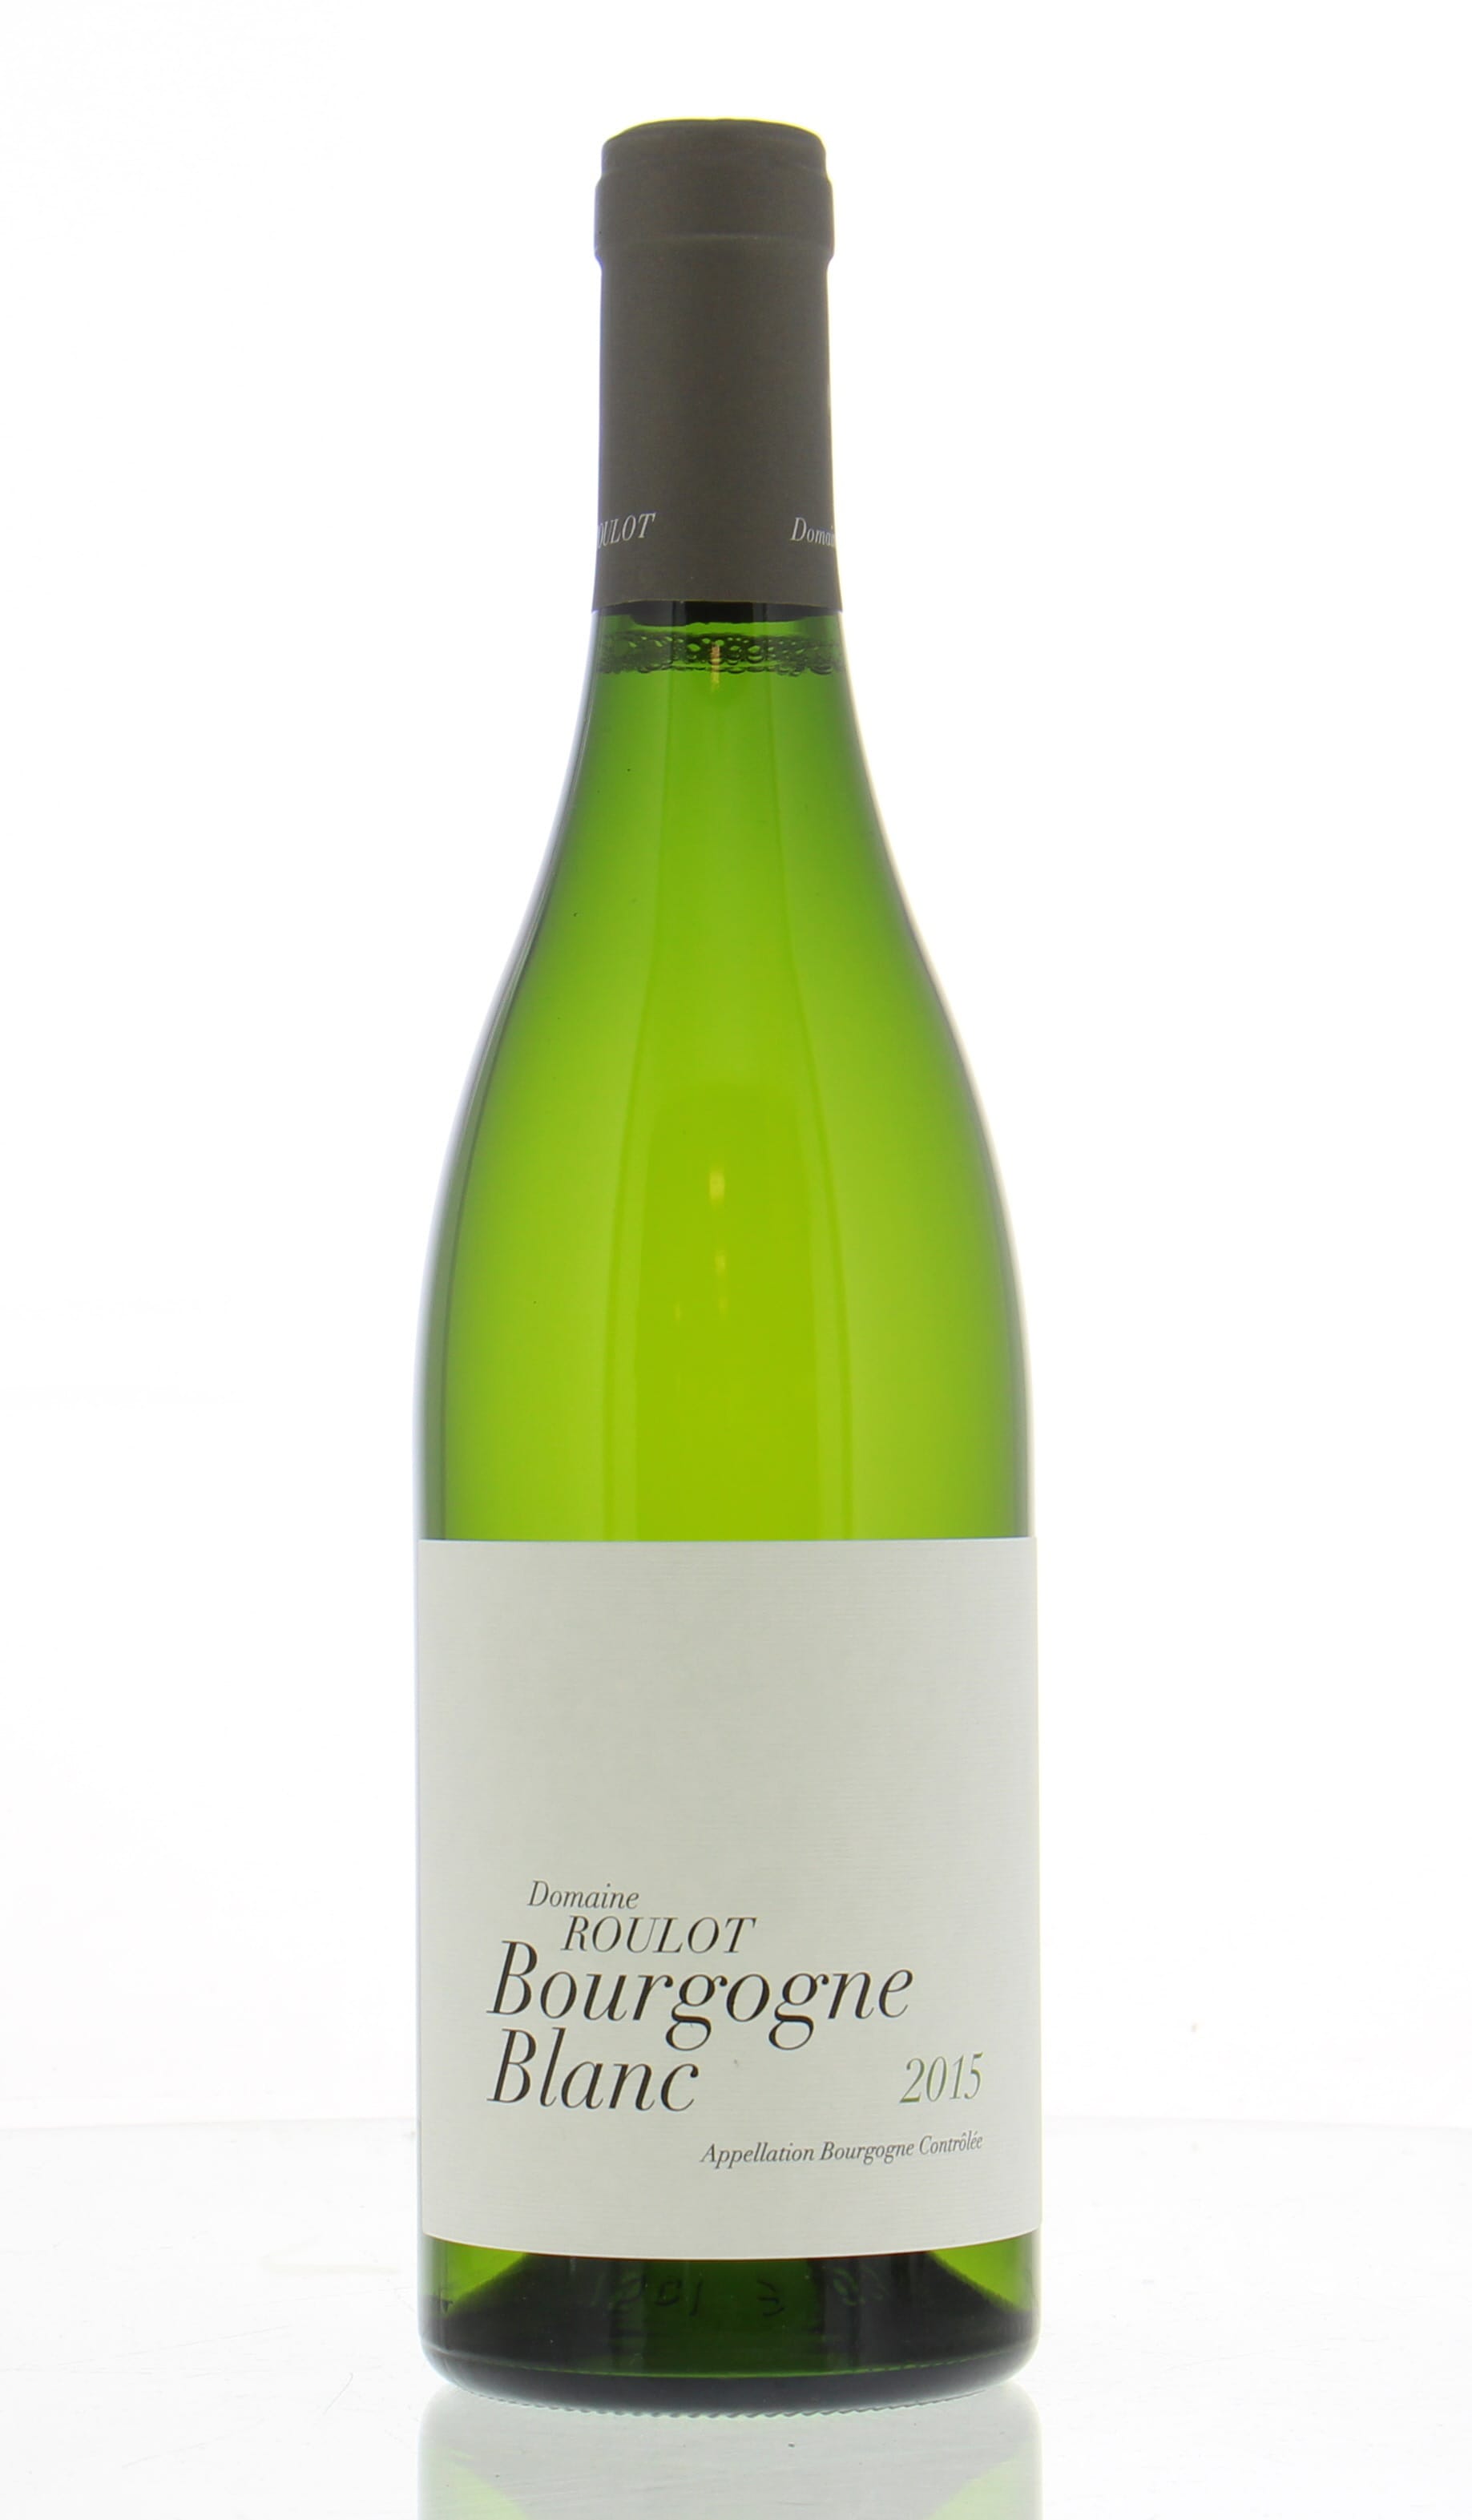 Guy Roulot - Bourgogne Blanc 2015 Perfect